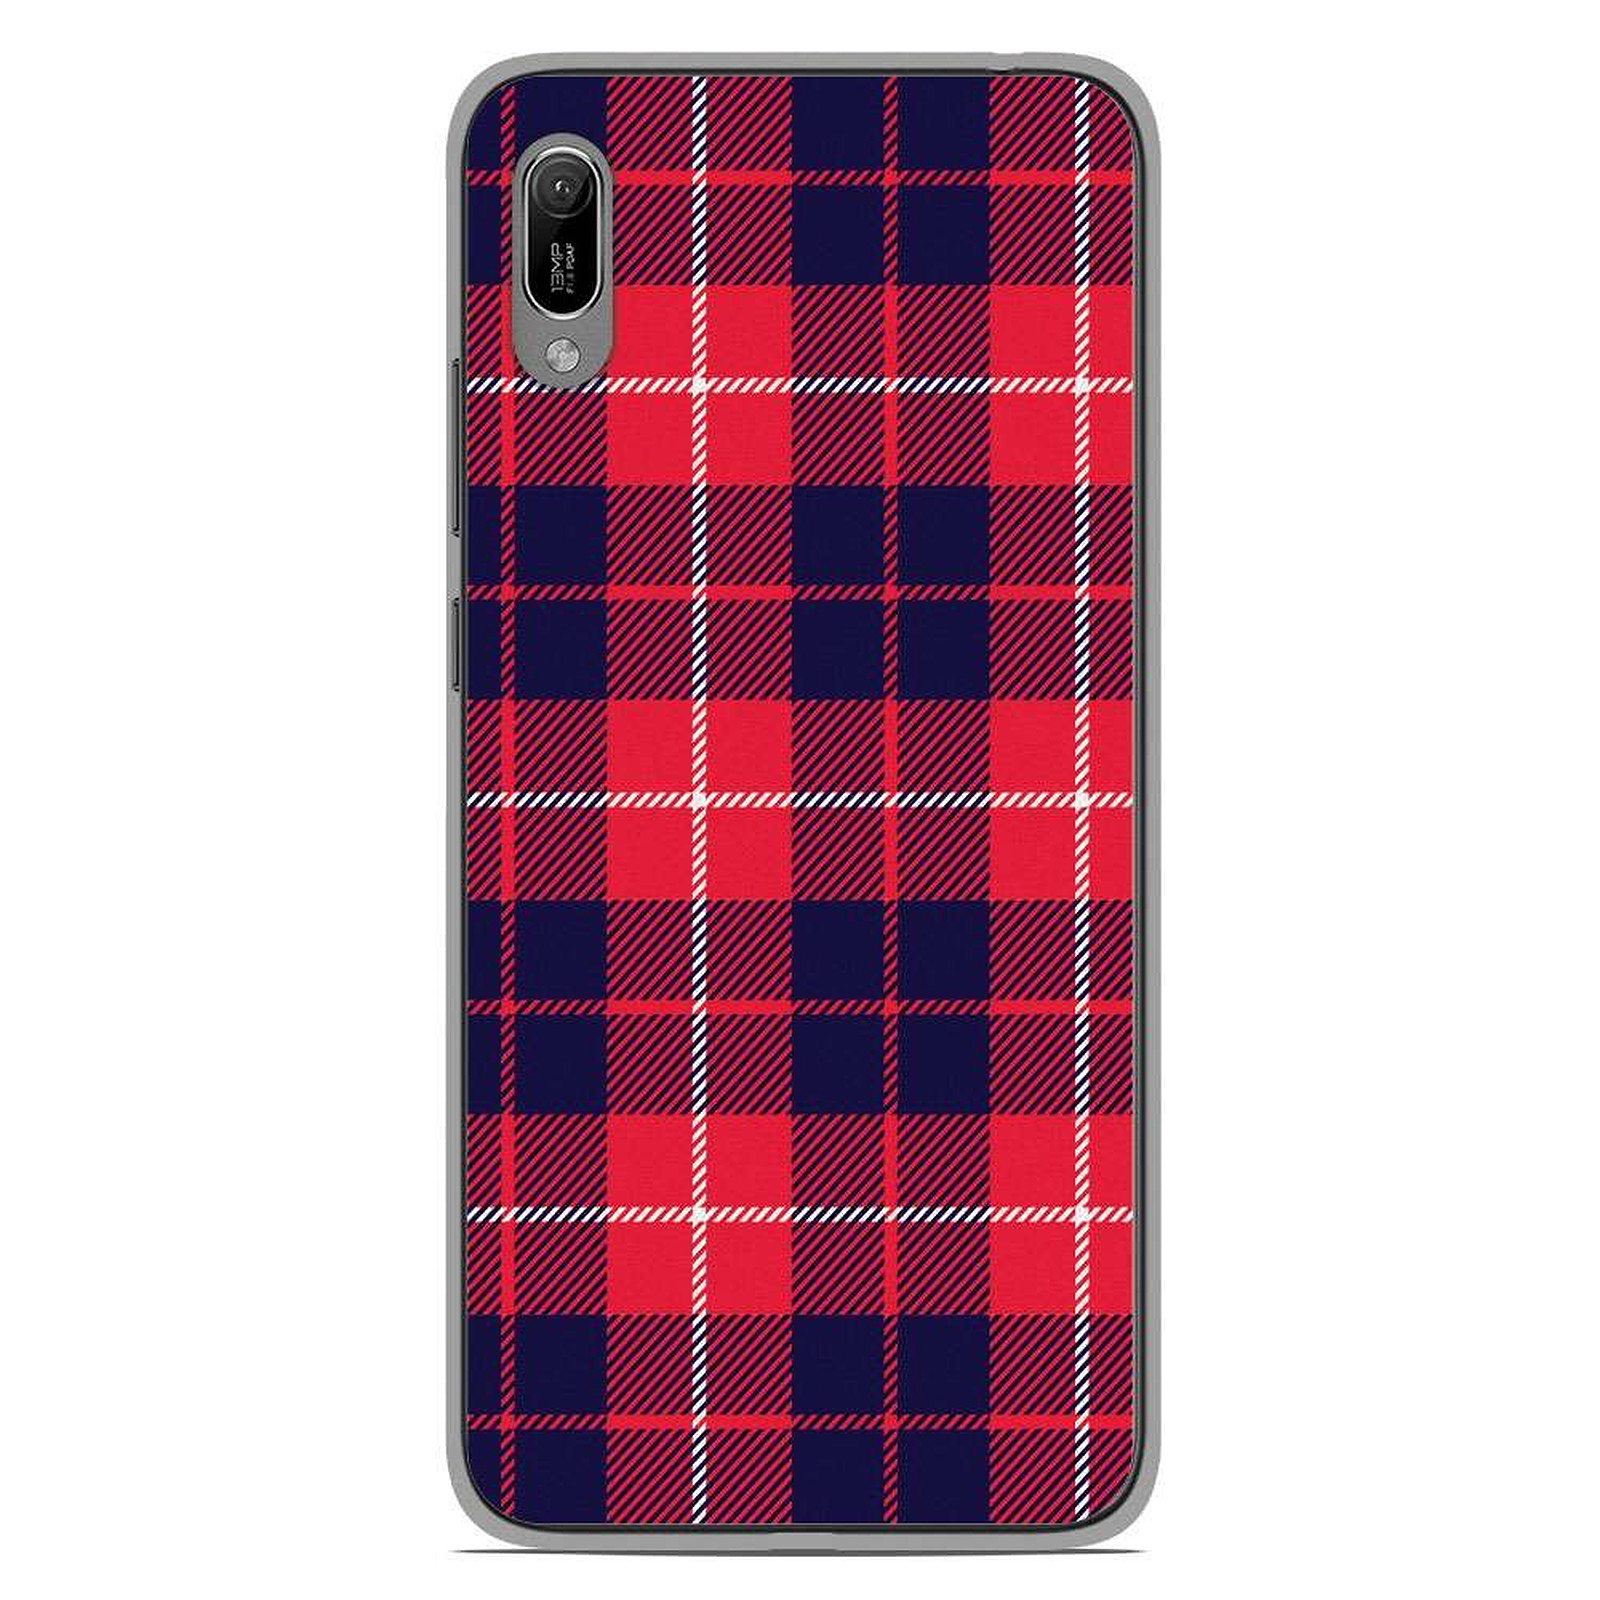 1001 Coques Coque silicone gel Huawei Y6 2019 motif Tartan Rouge 2 - Coque telephone 1001Coques